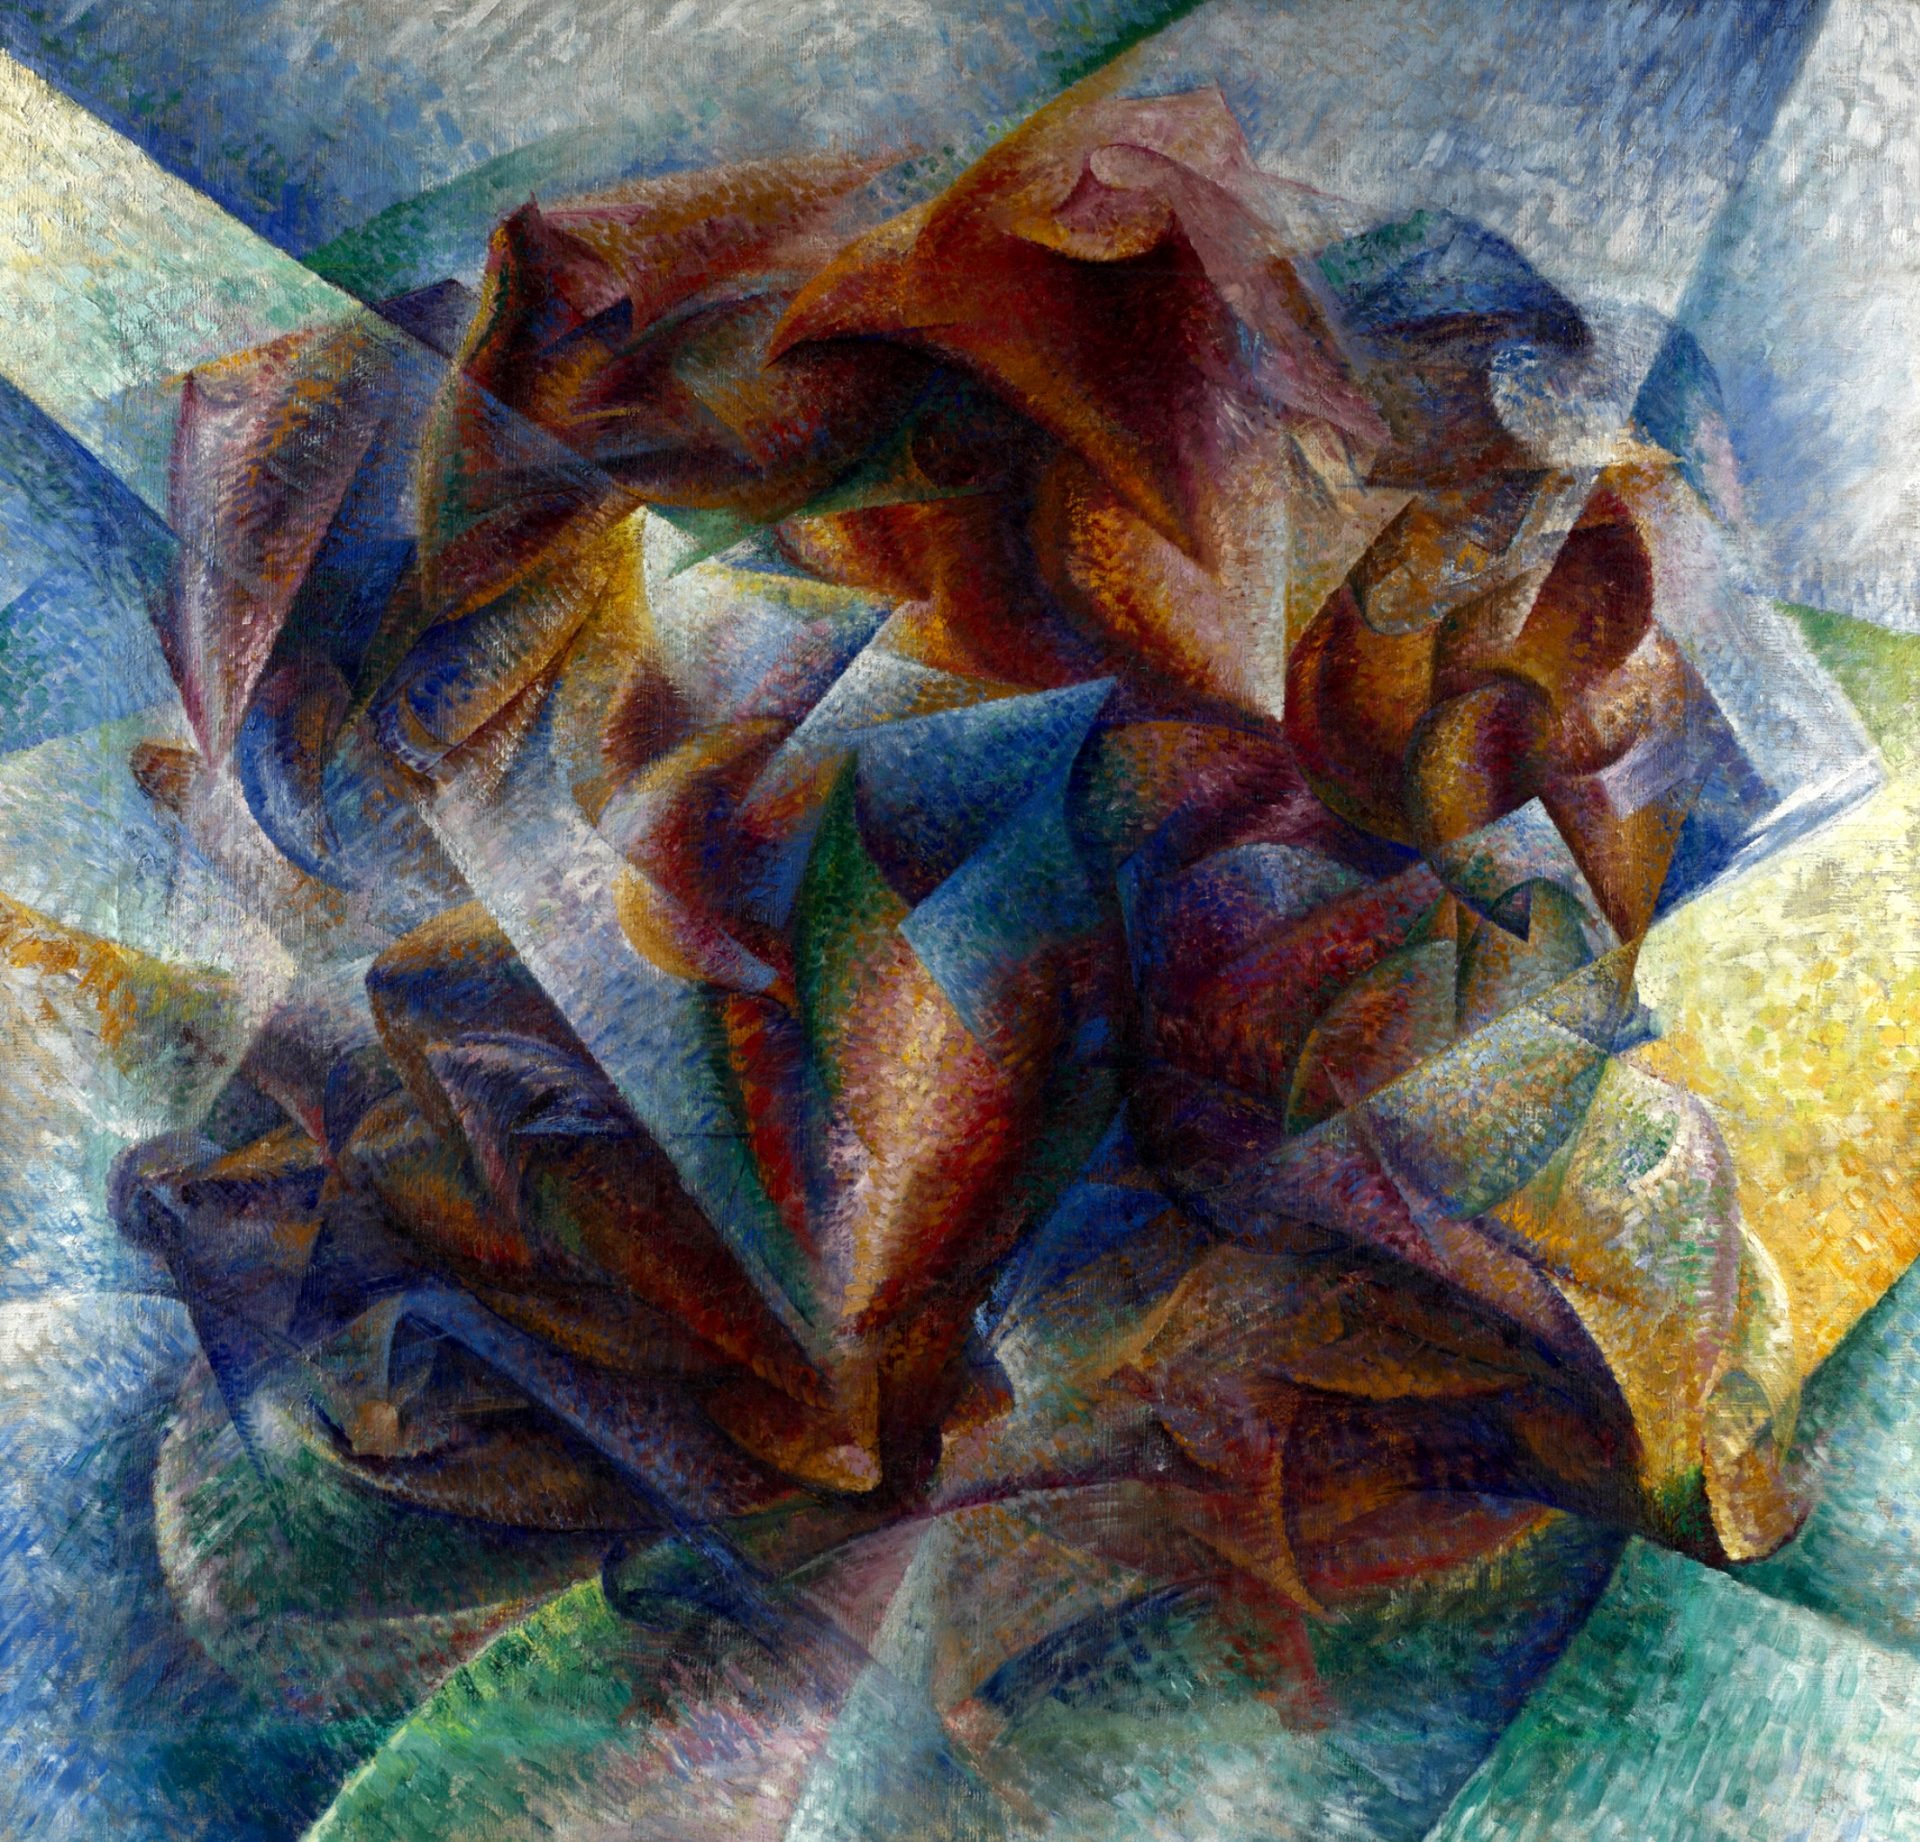 An artwork titled 'Dynamism of a Soccer Player' by Umberto Boccioni from 1913 captures the essence of Futurism with its swirling, overlapping forms and vibrant colors. The painting depicts the fluid motion and energy of a soccer player, abstractly rendered with fragmented shapes that seem to burst and blend into one another. The hues of reds, blues, and golds, combined with the intricate brushwork, convey a sense of rapid movement and the dynamic spirit of the sport.